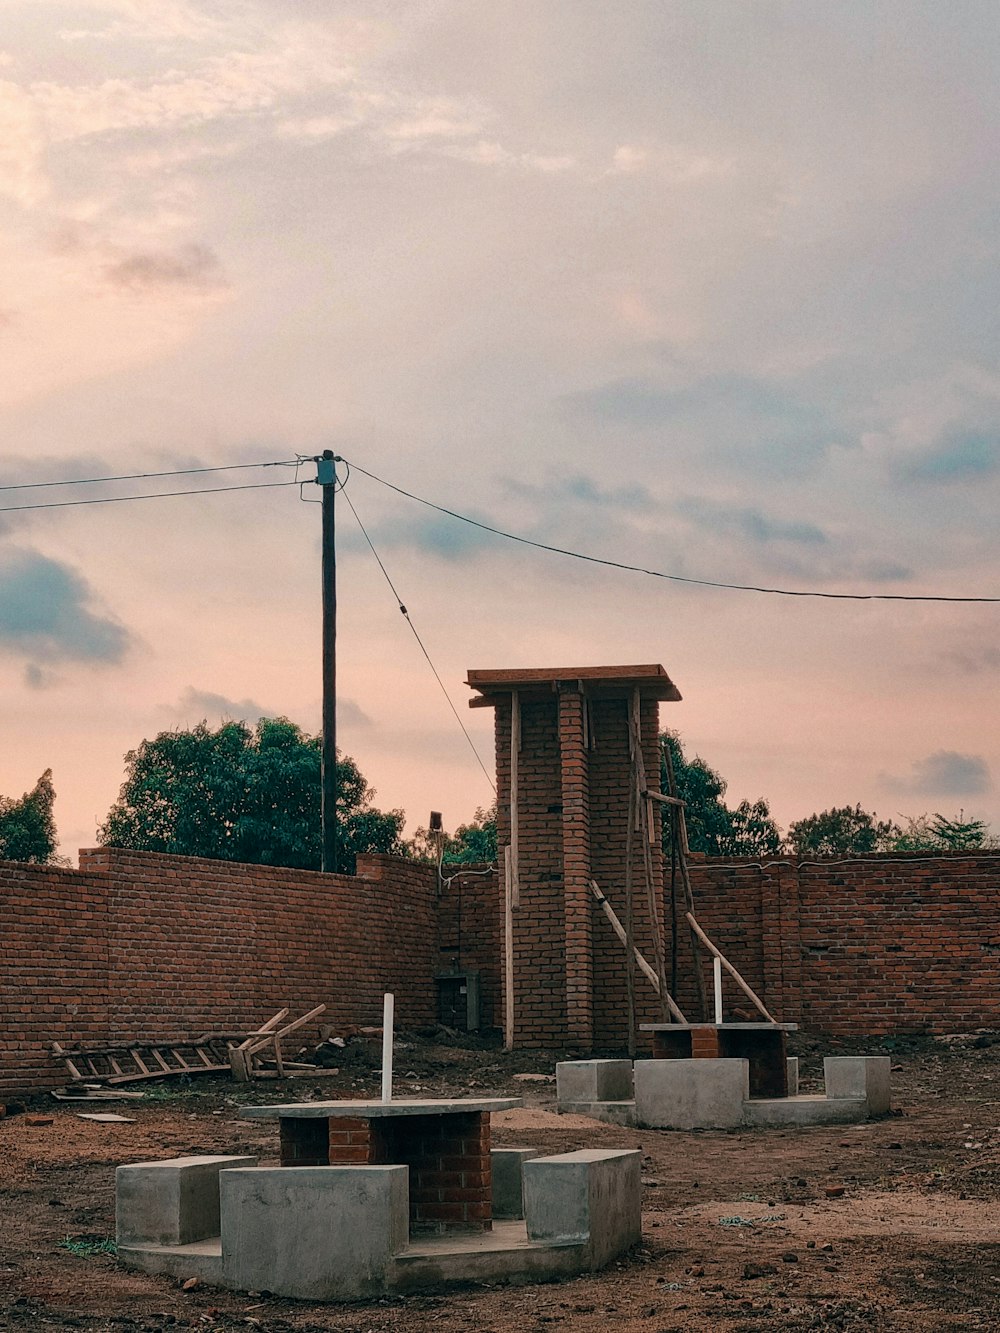 a brick structure sitting in the middle of a dirt field